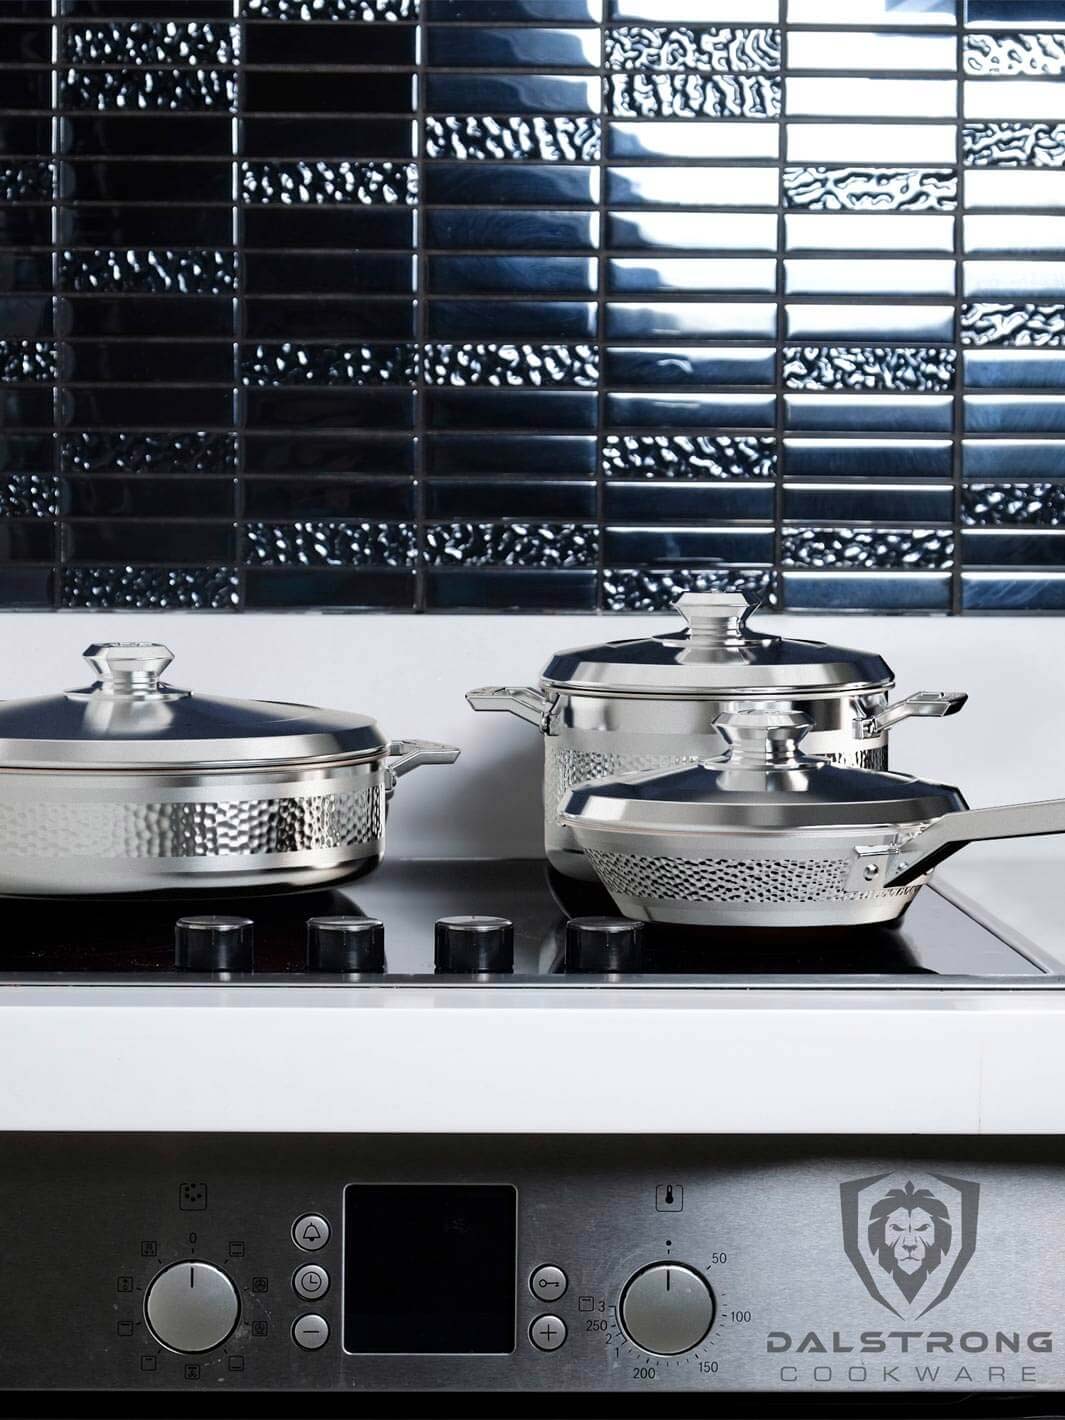 Dalstrong avalon series 6 piece cookware set silver on a stovetop.